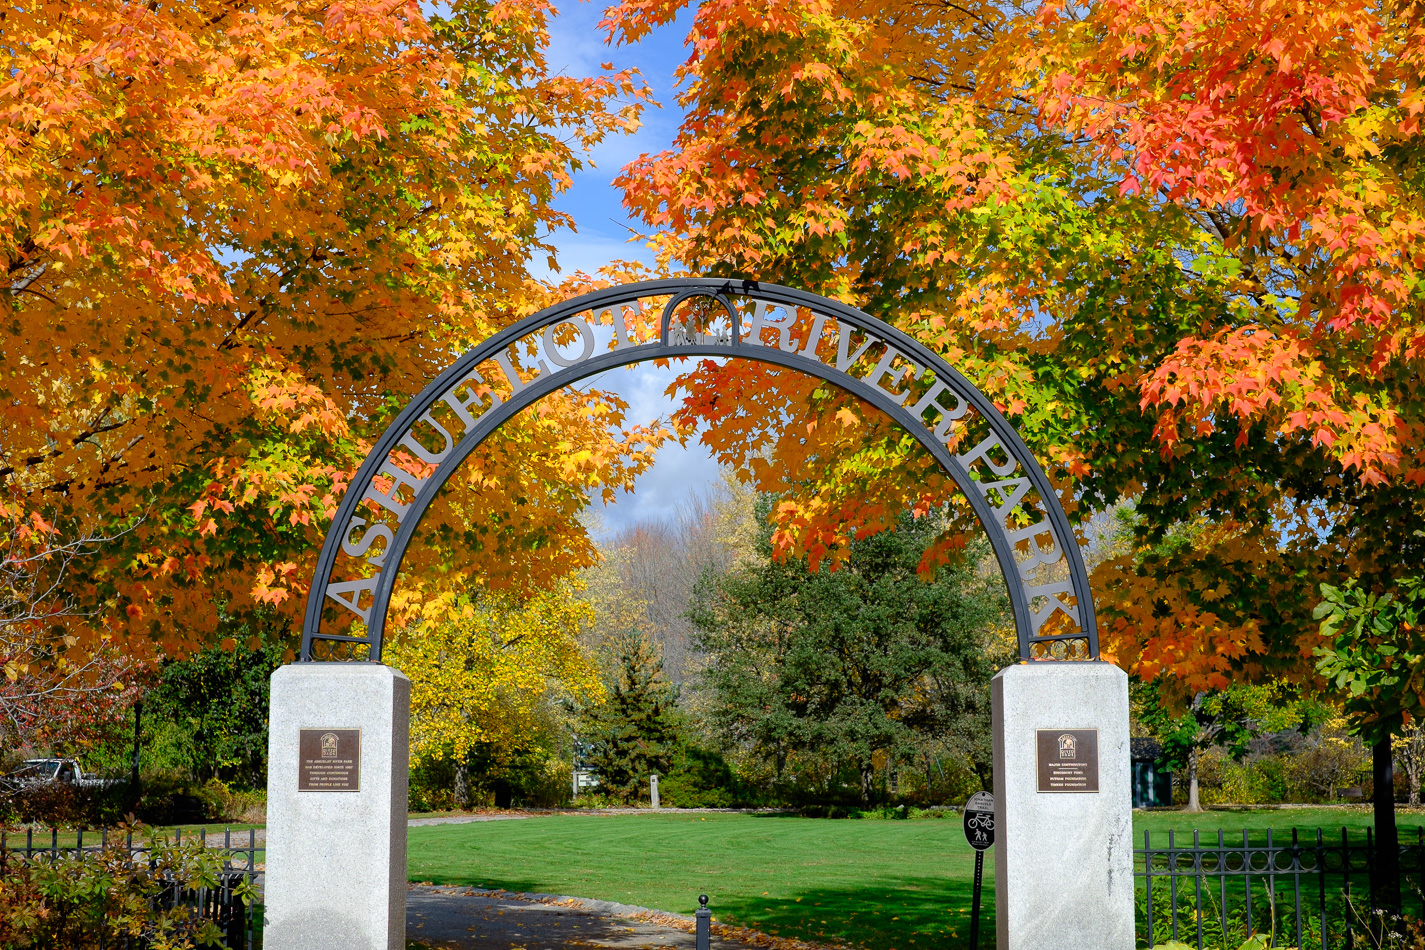 Color photo of Autumn foliage at the entrance of the Ashuelot River Park in Keene, NH